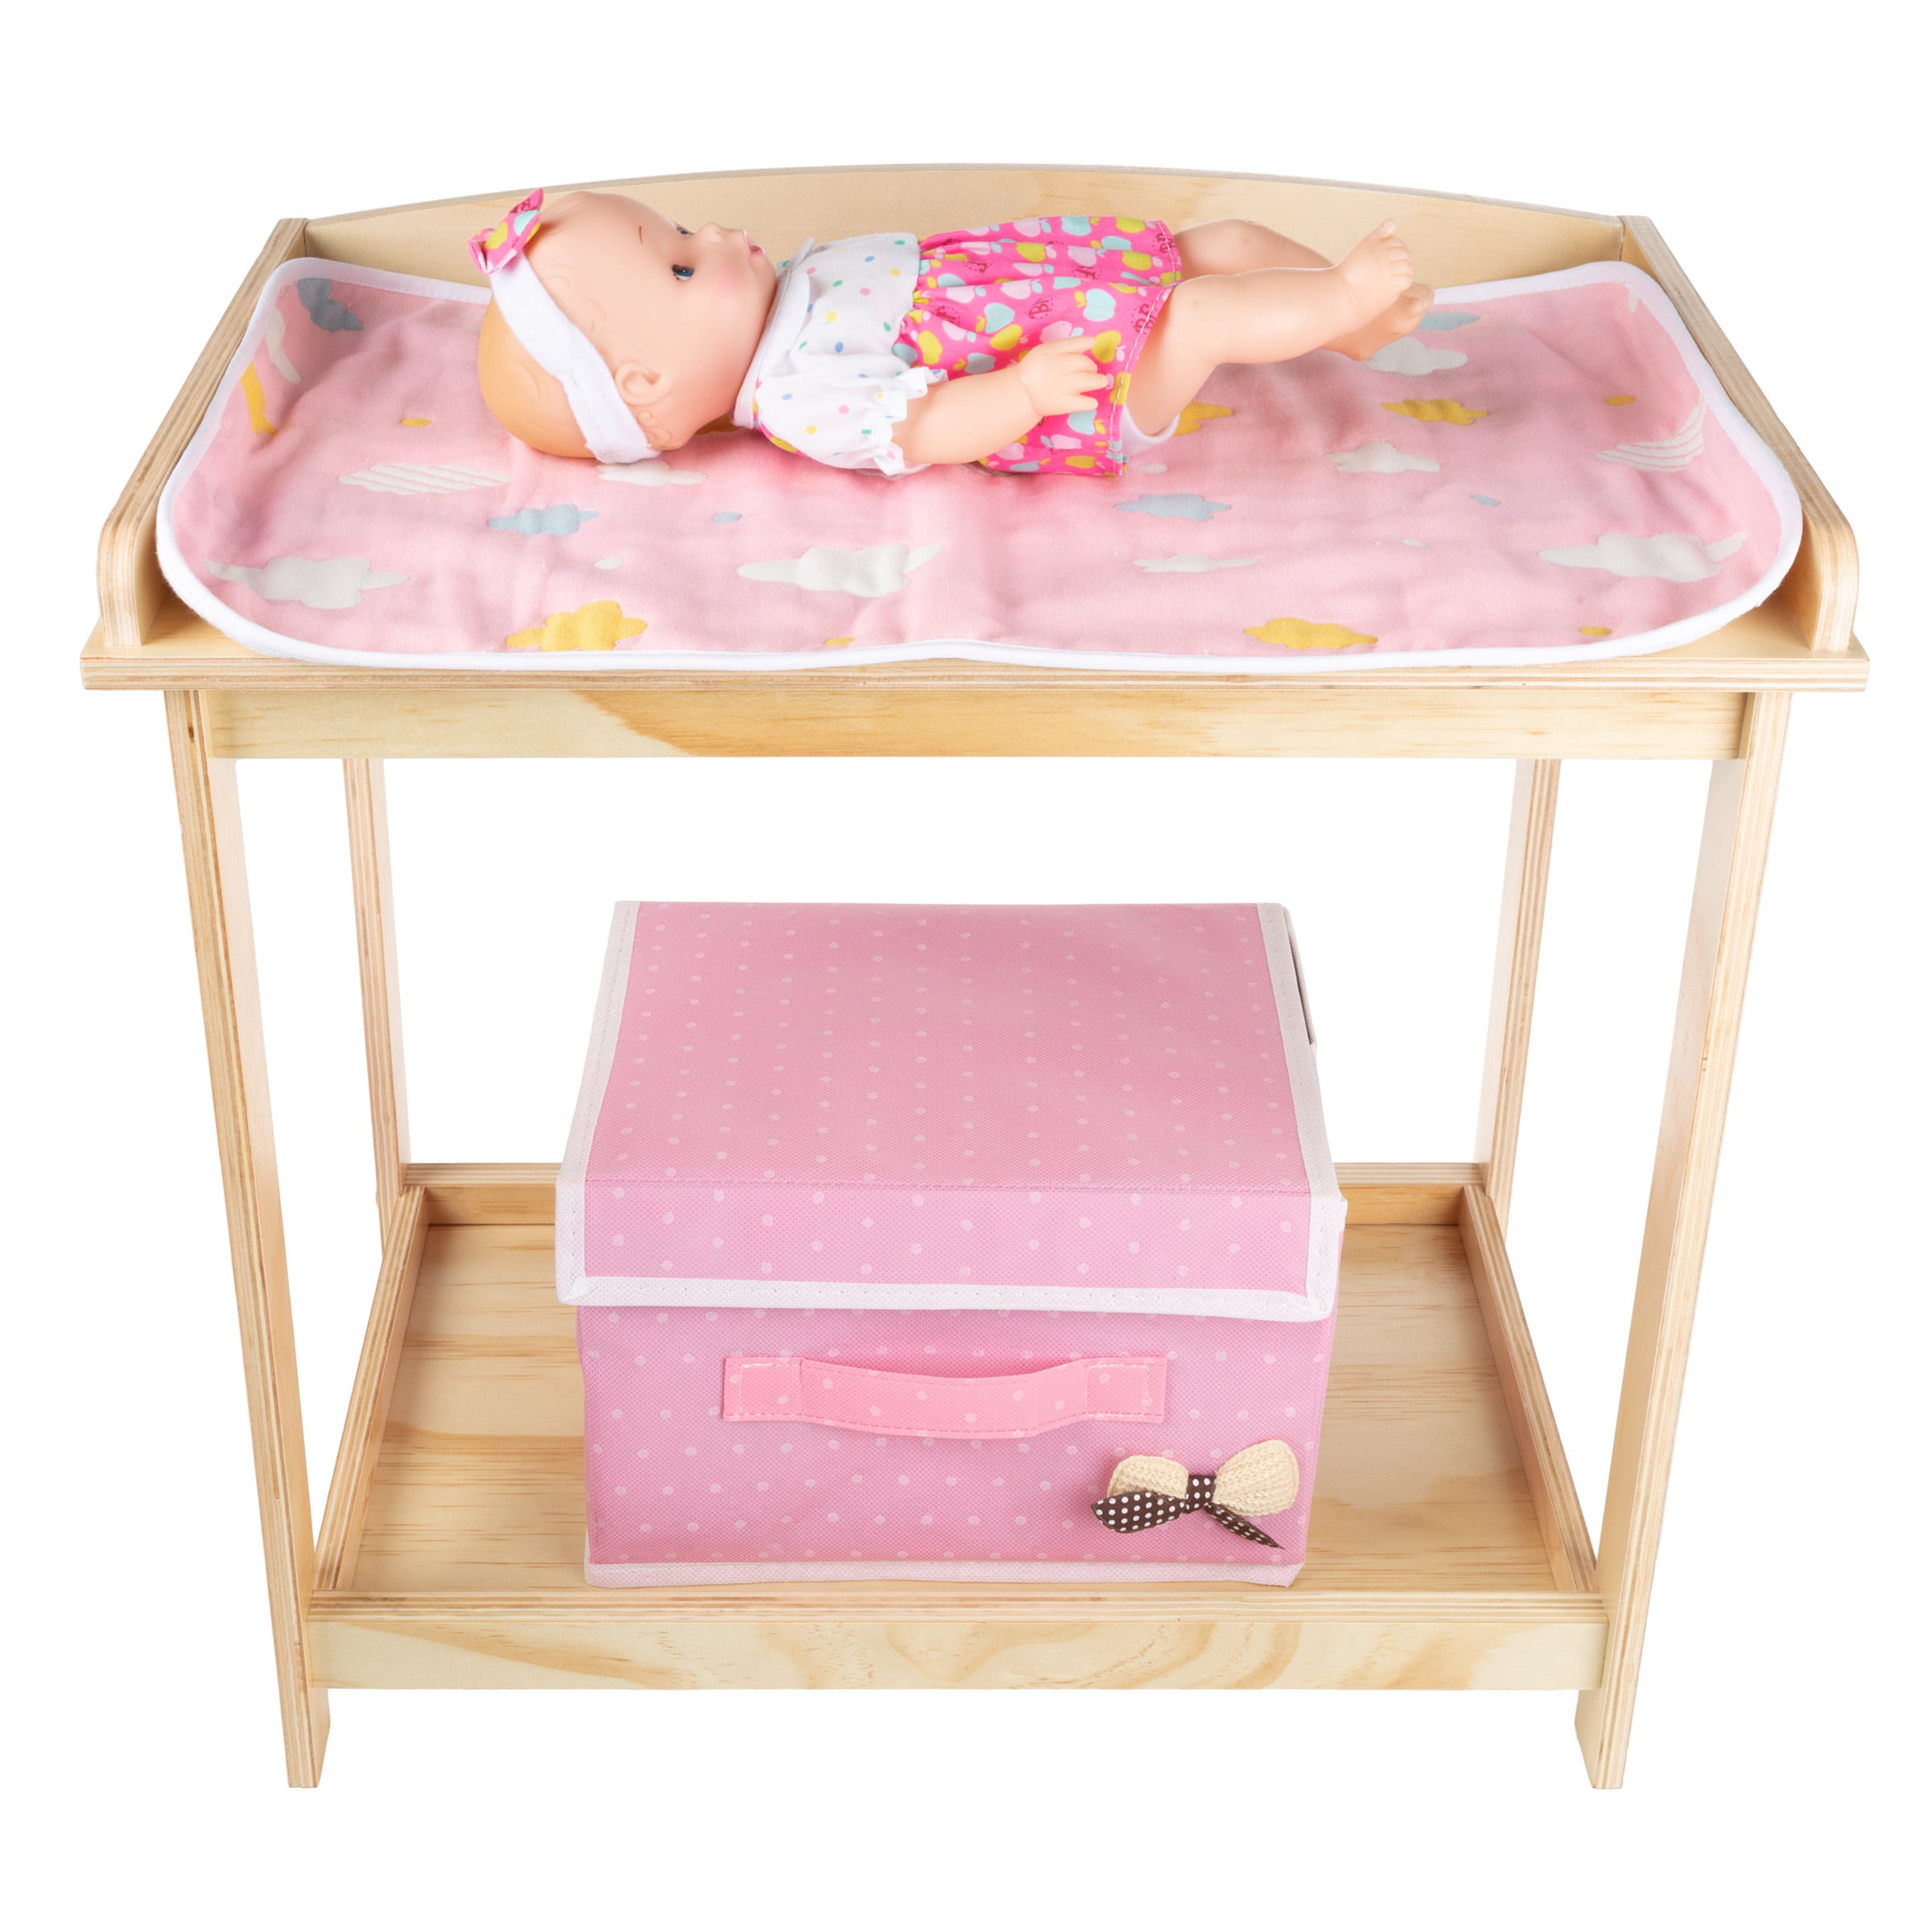 Baby Doll Changing Table For 18 Dolls Stuffed Animals Wooden Diaper Station